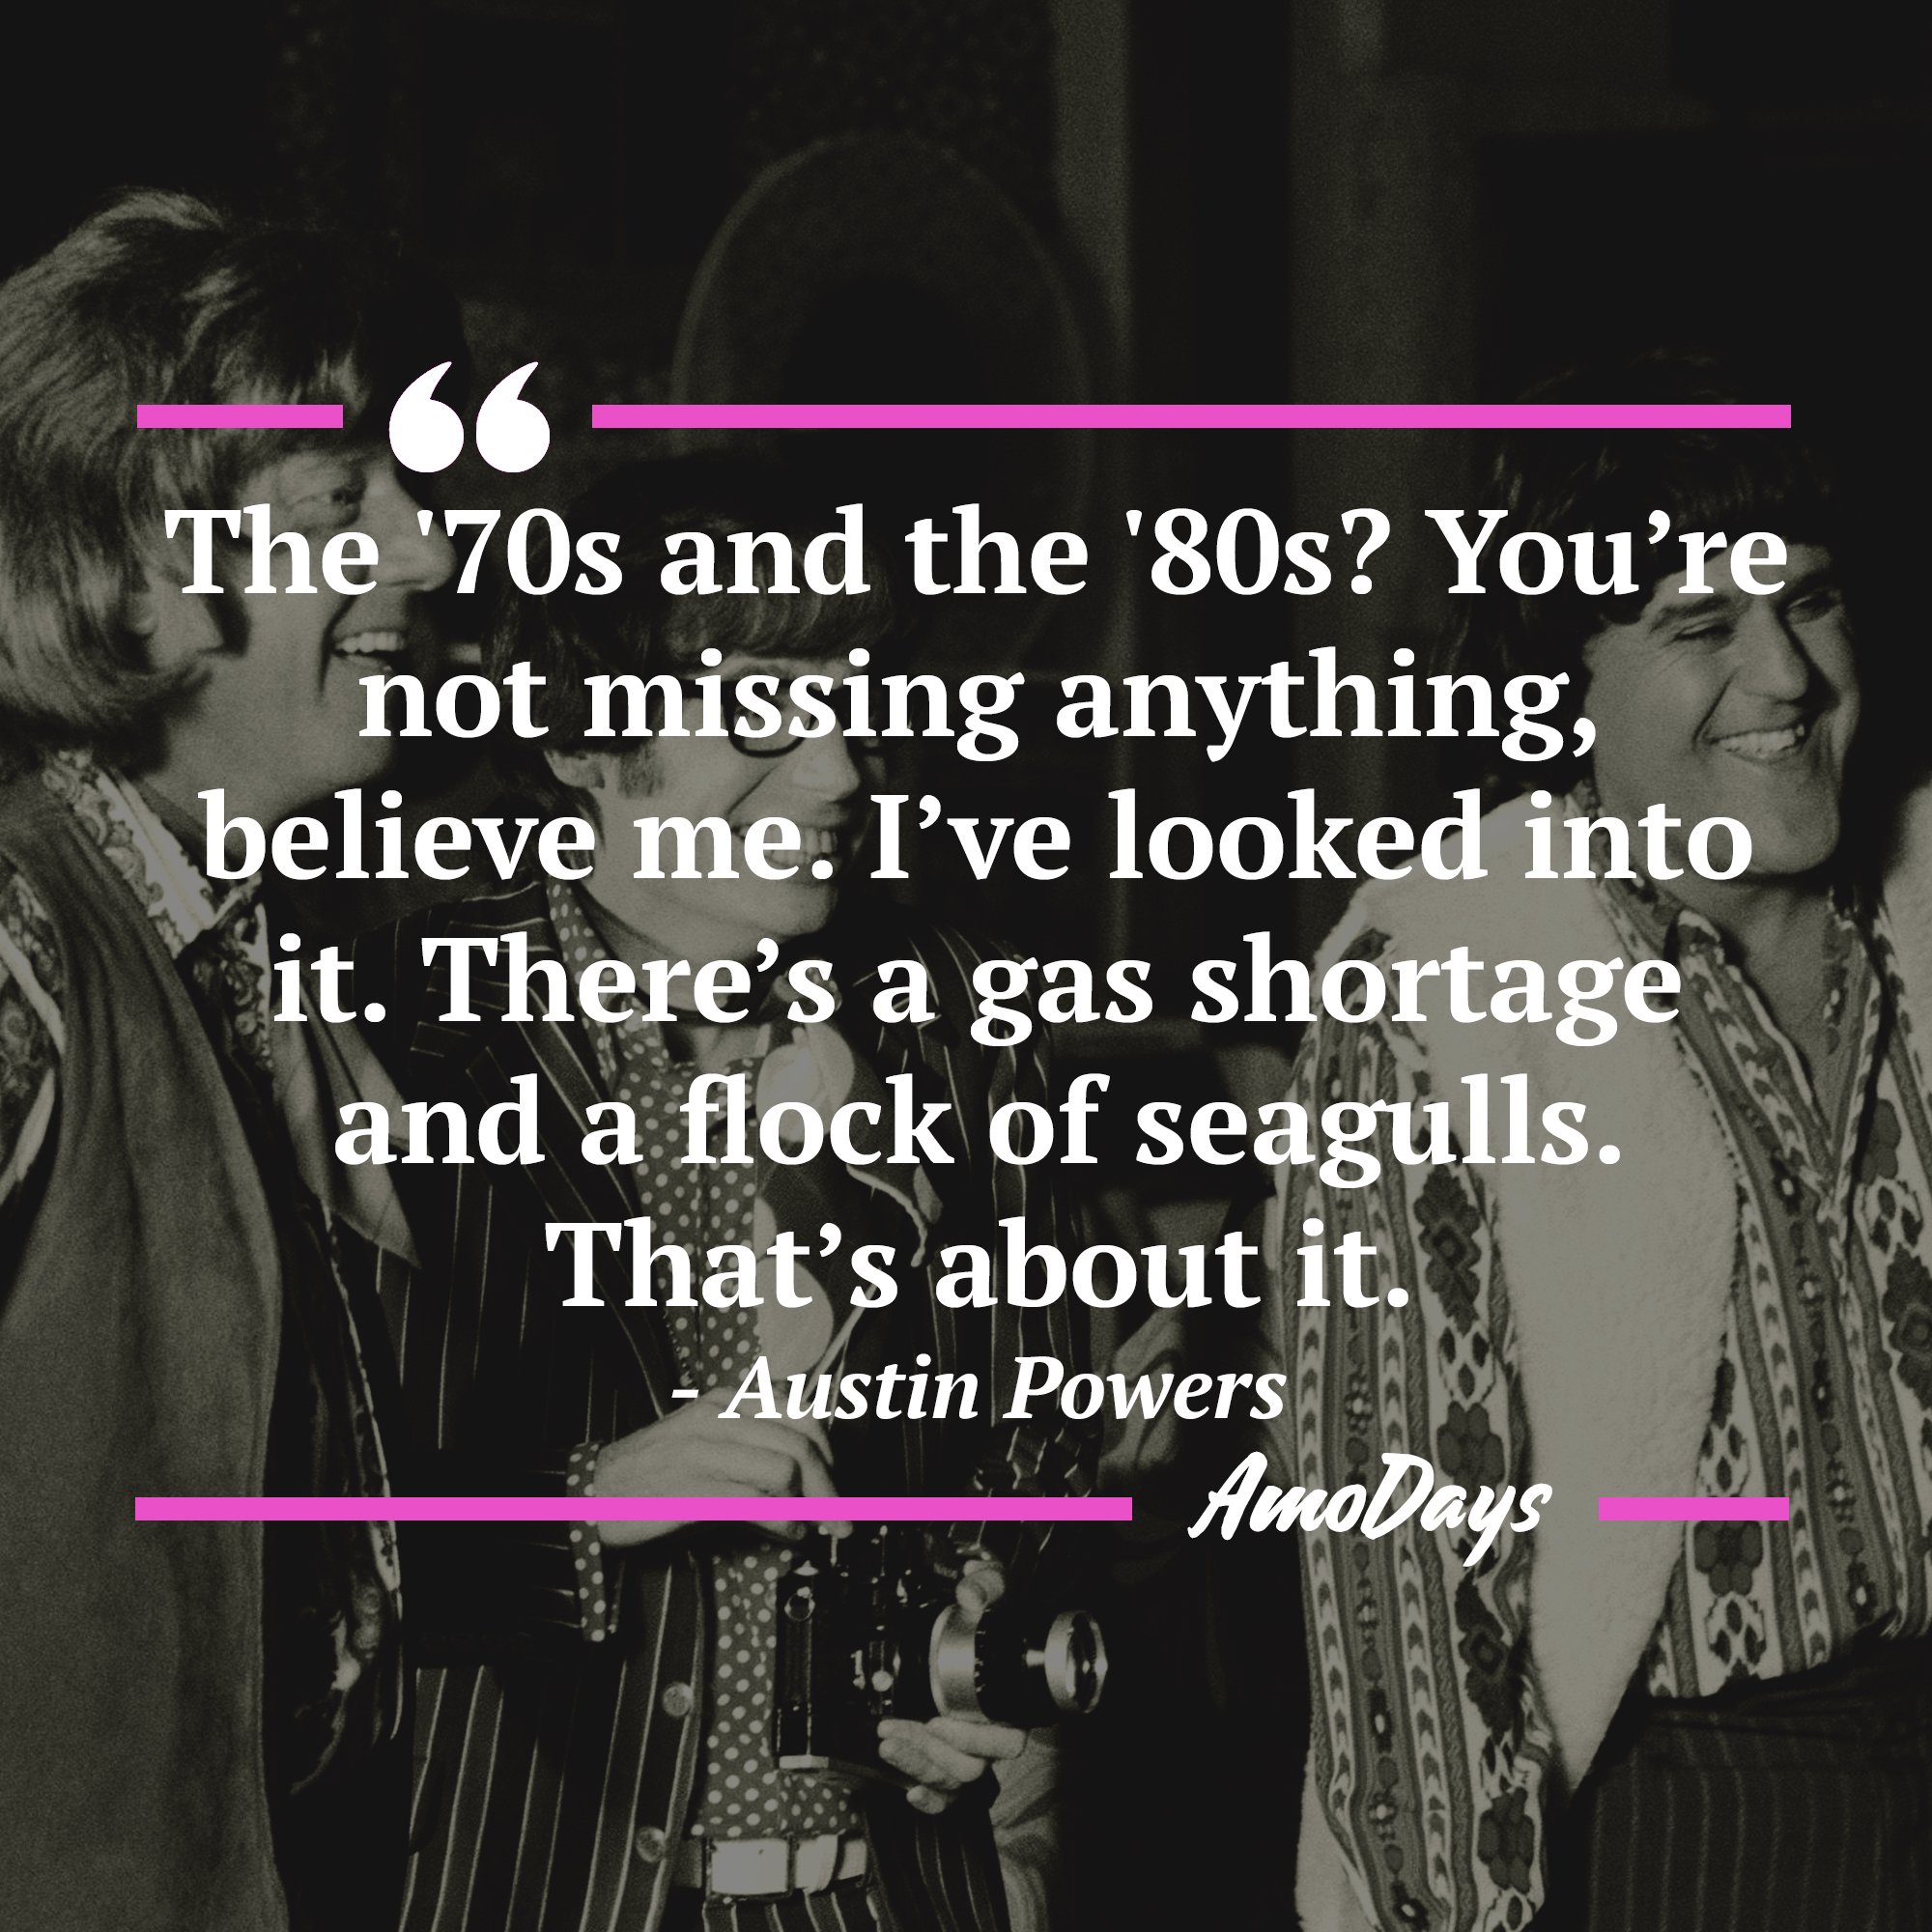 Austin Powers's quote: "The '70s and the '80s? You’re not missing anything, believe me. I’ve looked into it. There’s a gas shortage and a flock of seagulls. That’s about it.” | Image: AmoDays